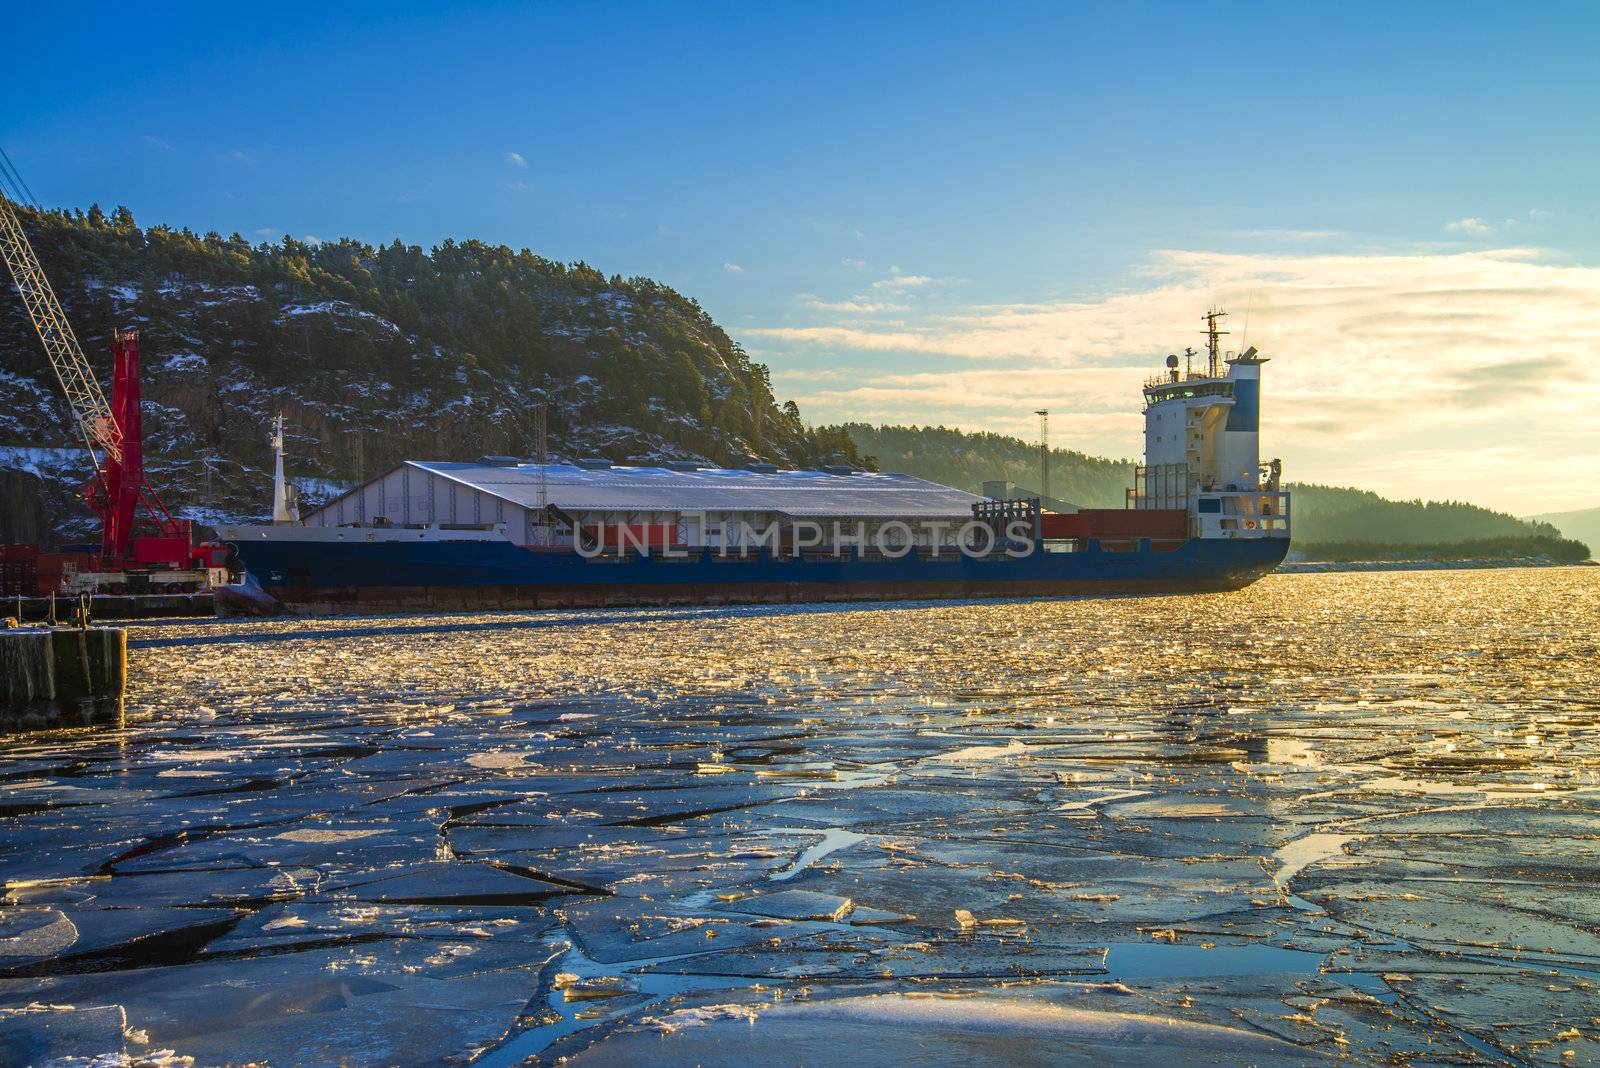 mv elisabeth is a container ship which has been docked at the port of Halden and unloaded containers and are about to leave the port of Halden, the image is shot in december 2012